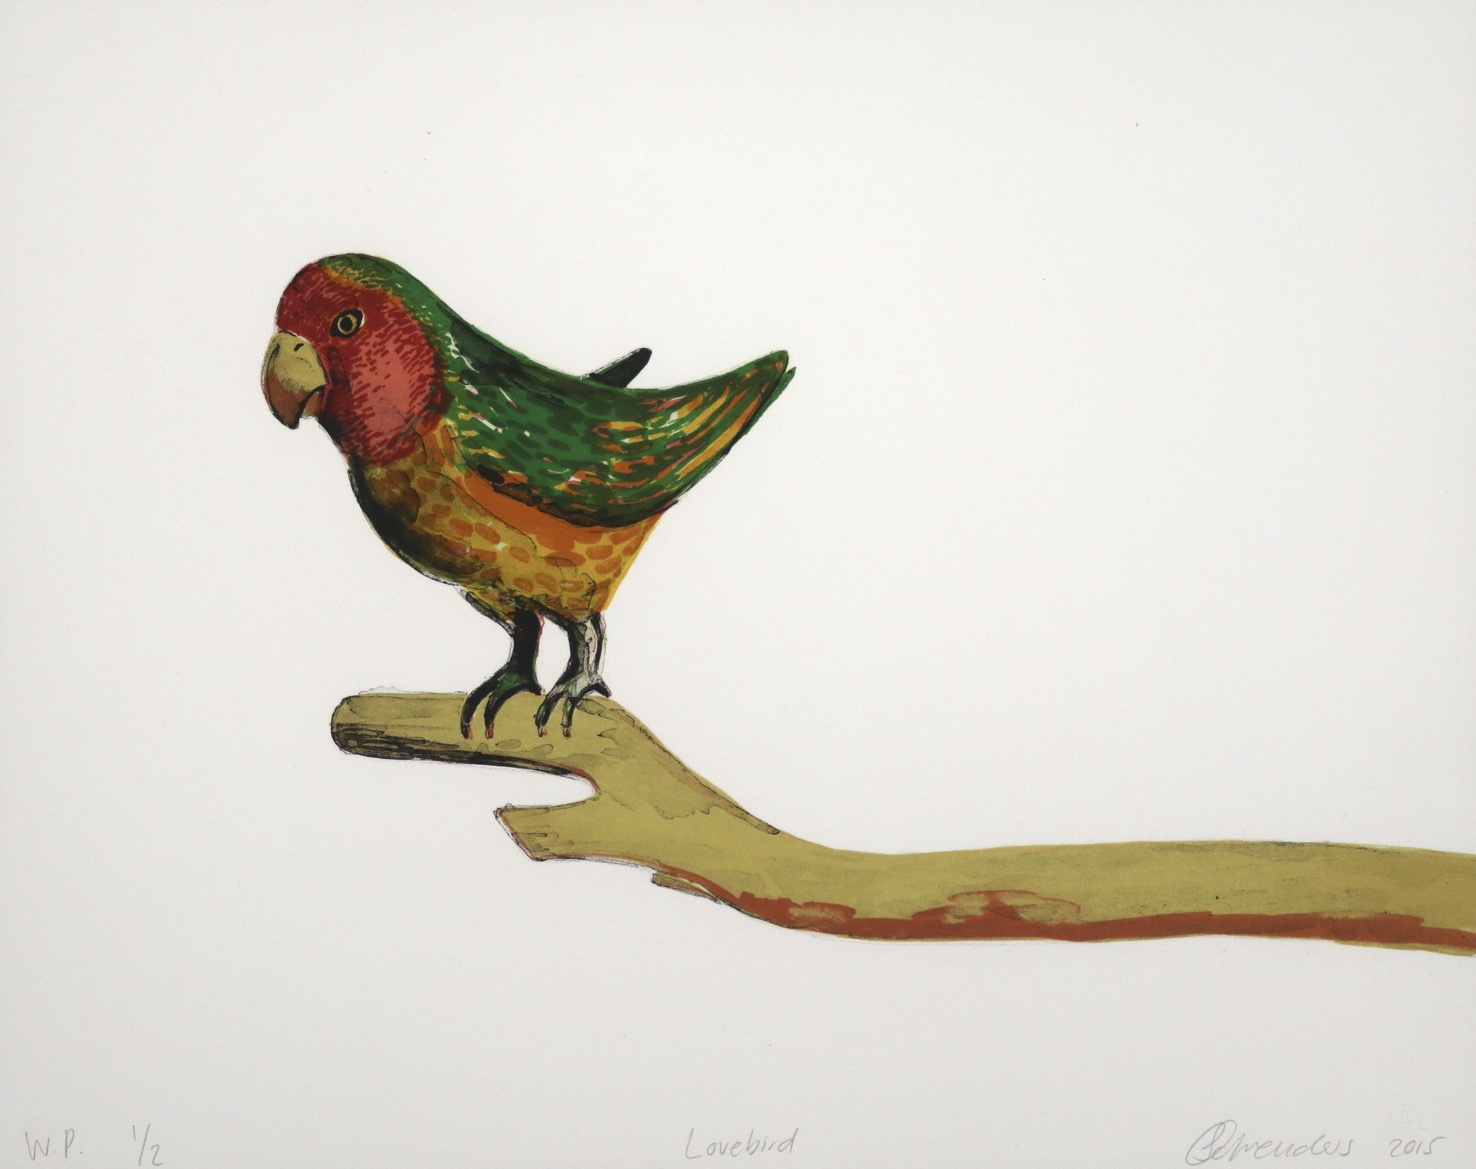 A brightly coloured love bird standing on a wooden branch perch